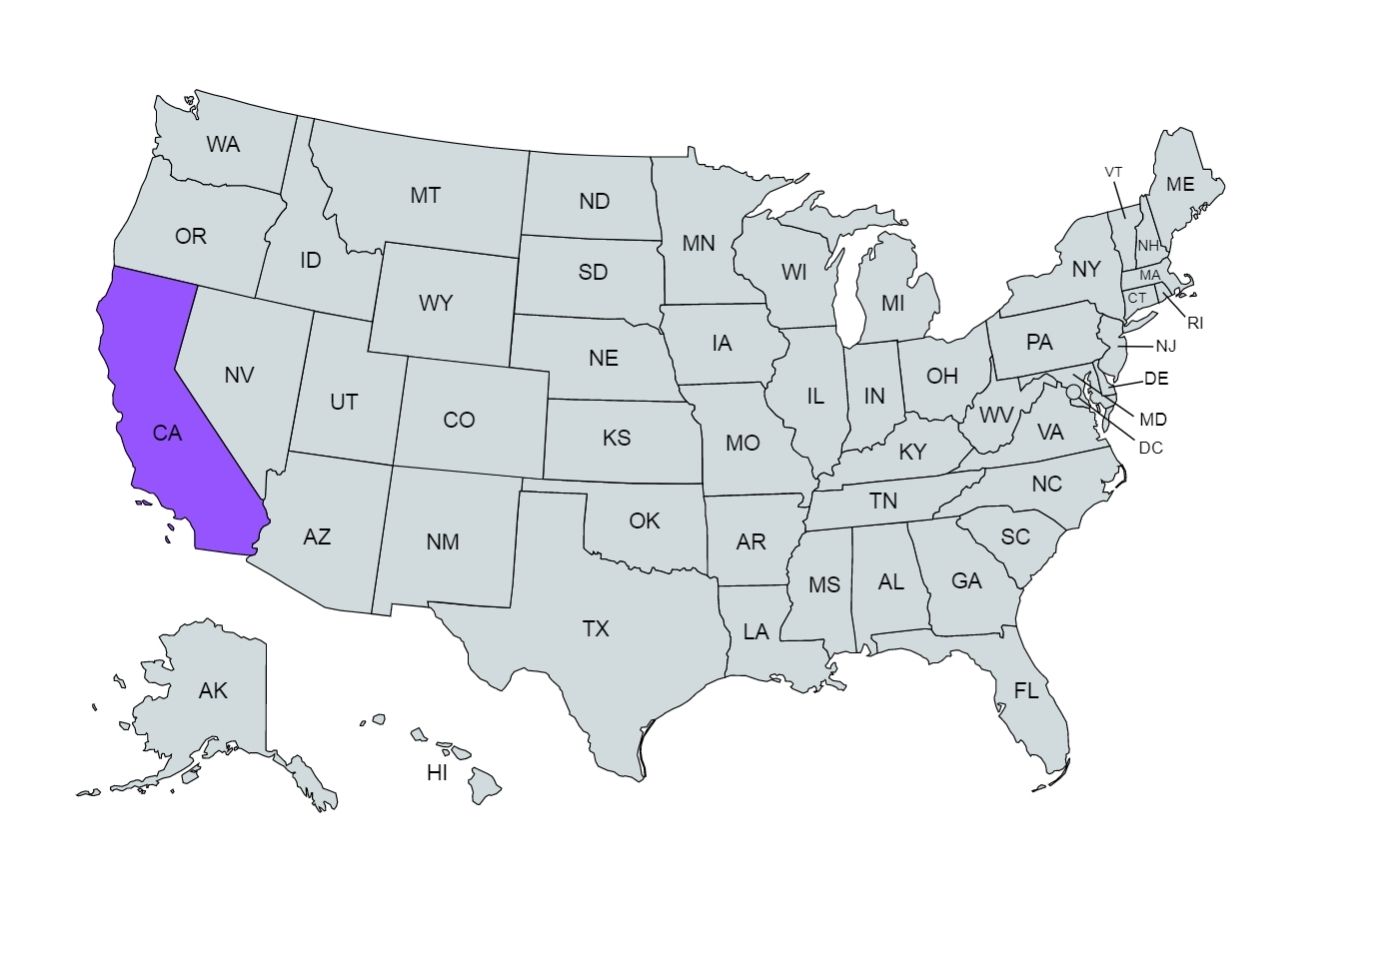 U.S.A map with the California state marked in purple